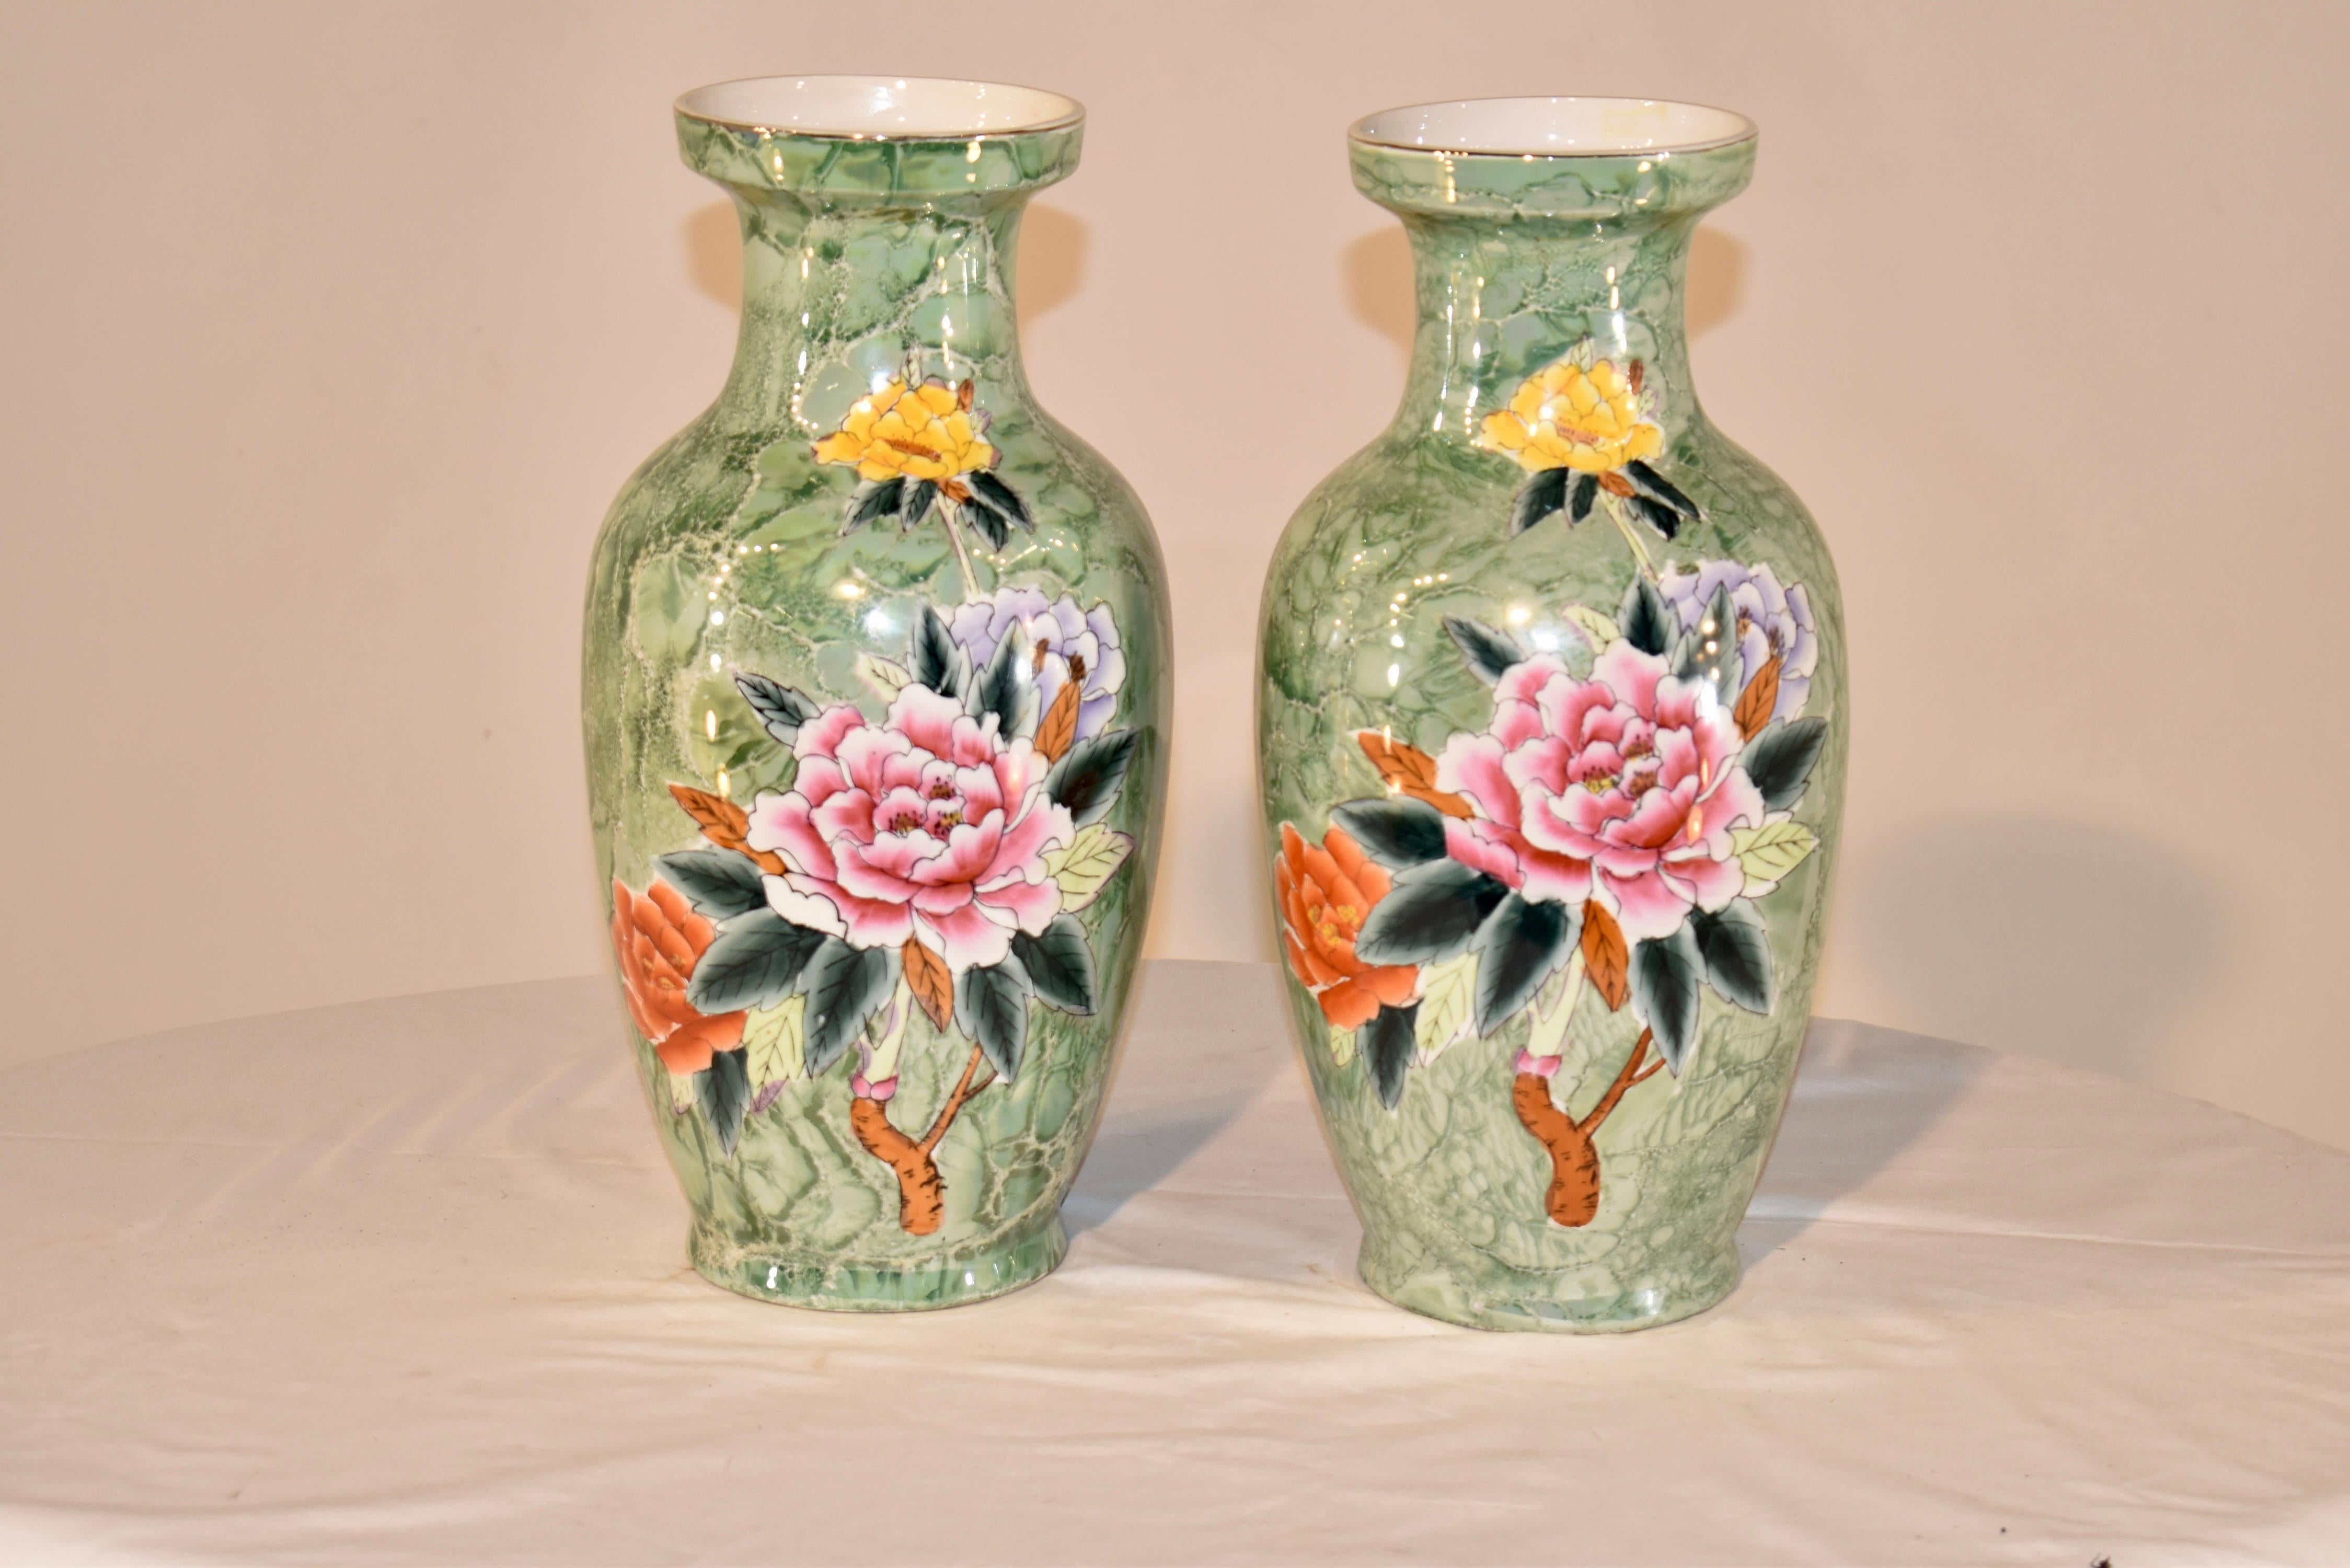 Pair of unusual large ceramic vases with wonderful shape and style.  The base color is a mottled green which is reminiscent of marble, and is hand painted with floral decorations.  They are beautiful,  and so different than anything we have had the